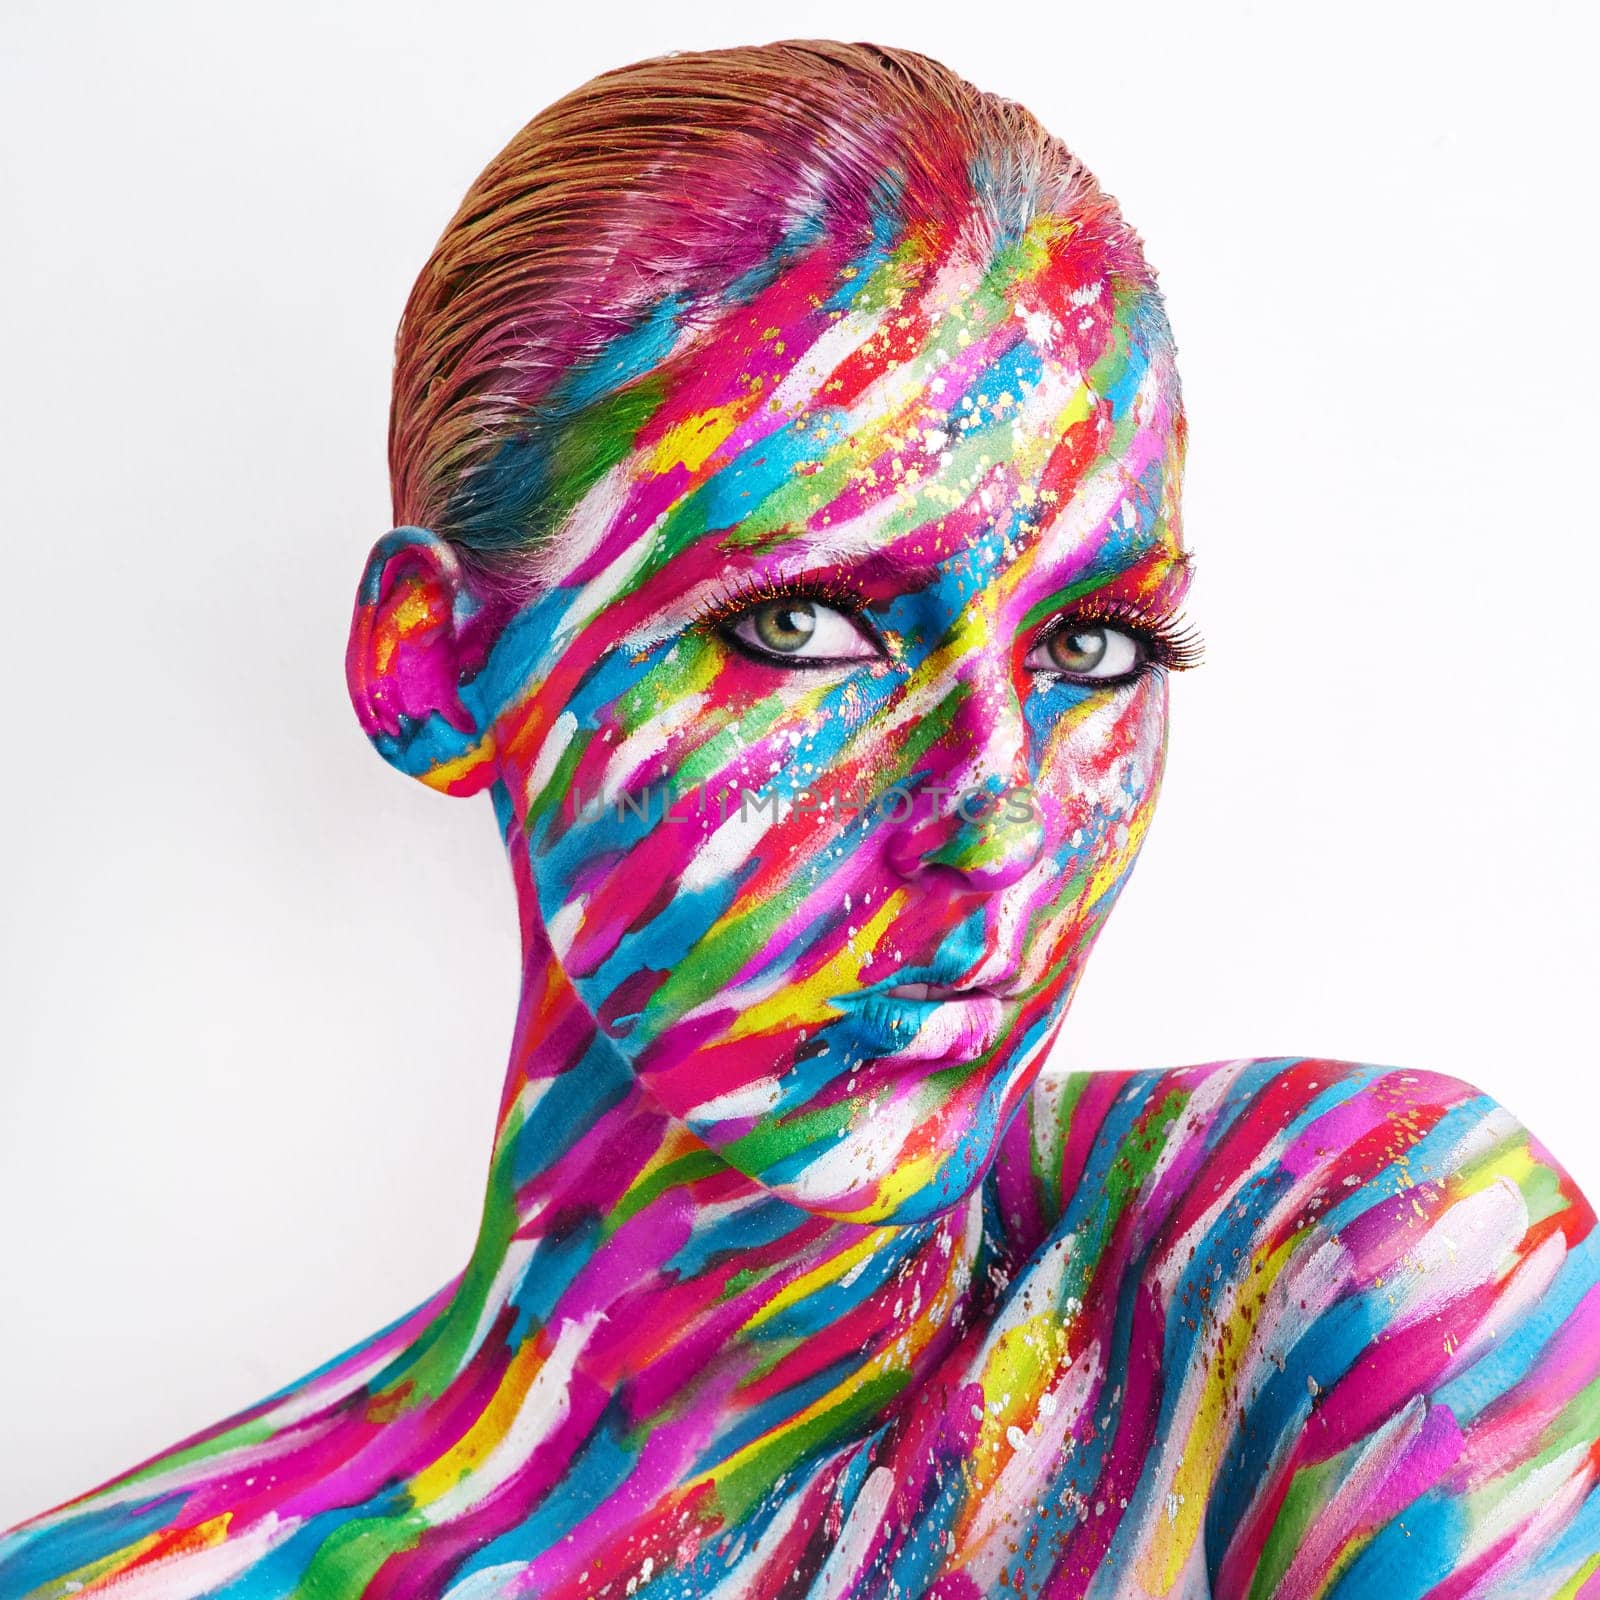 Studio shot of a young woman posing with brightly colored paint on her face against a white background.